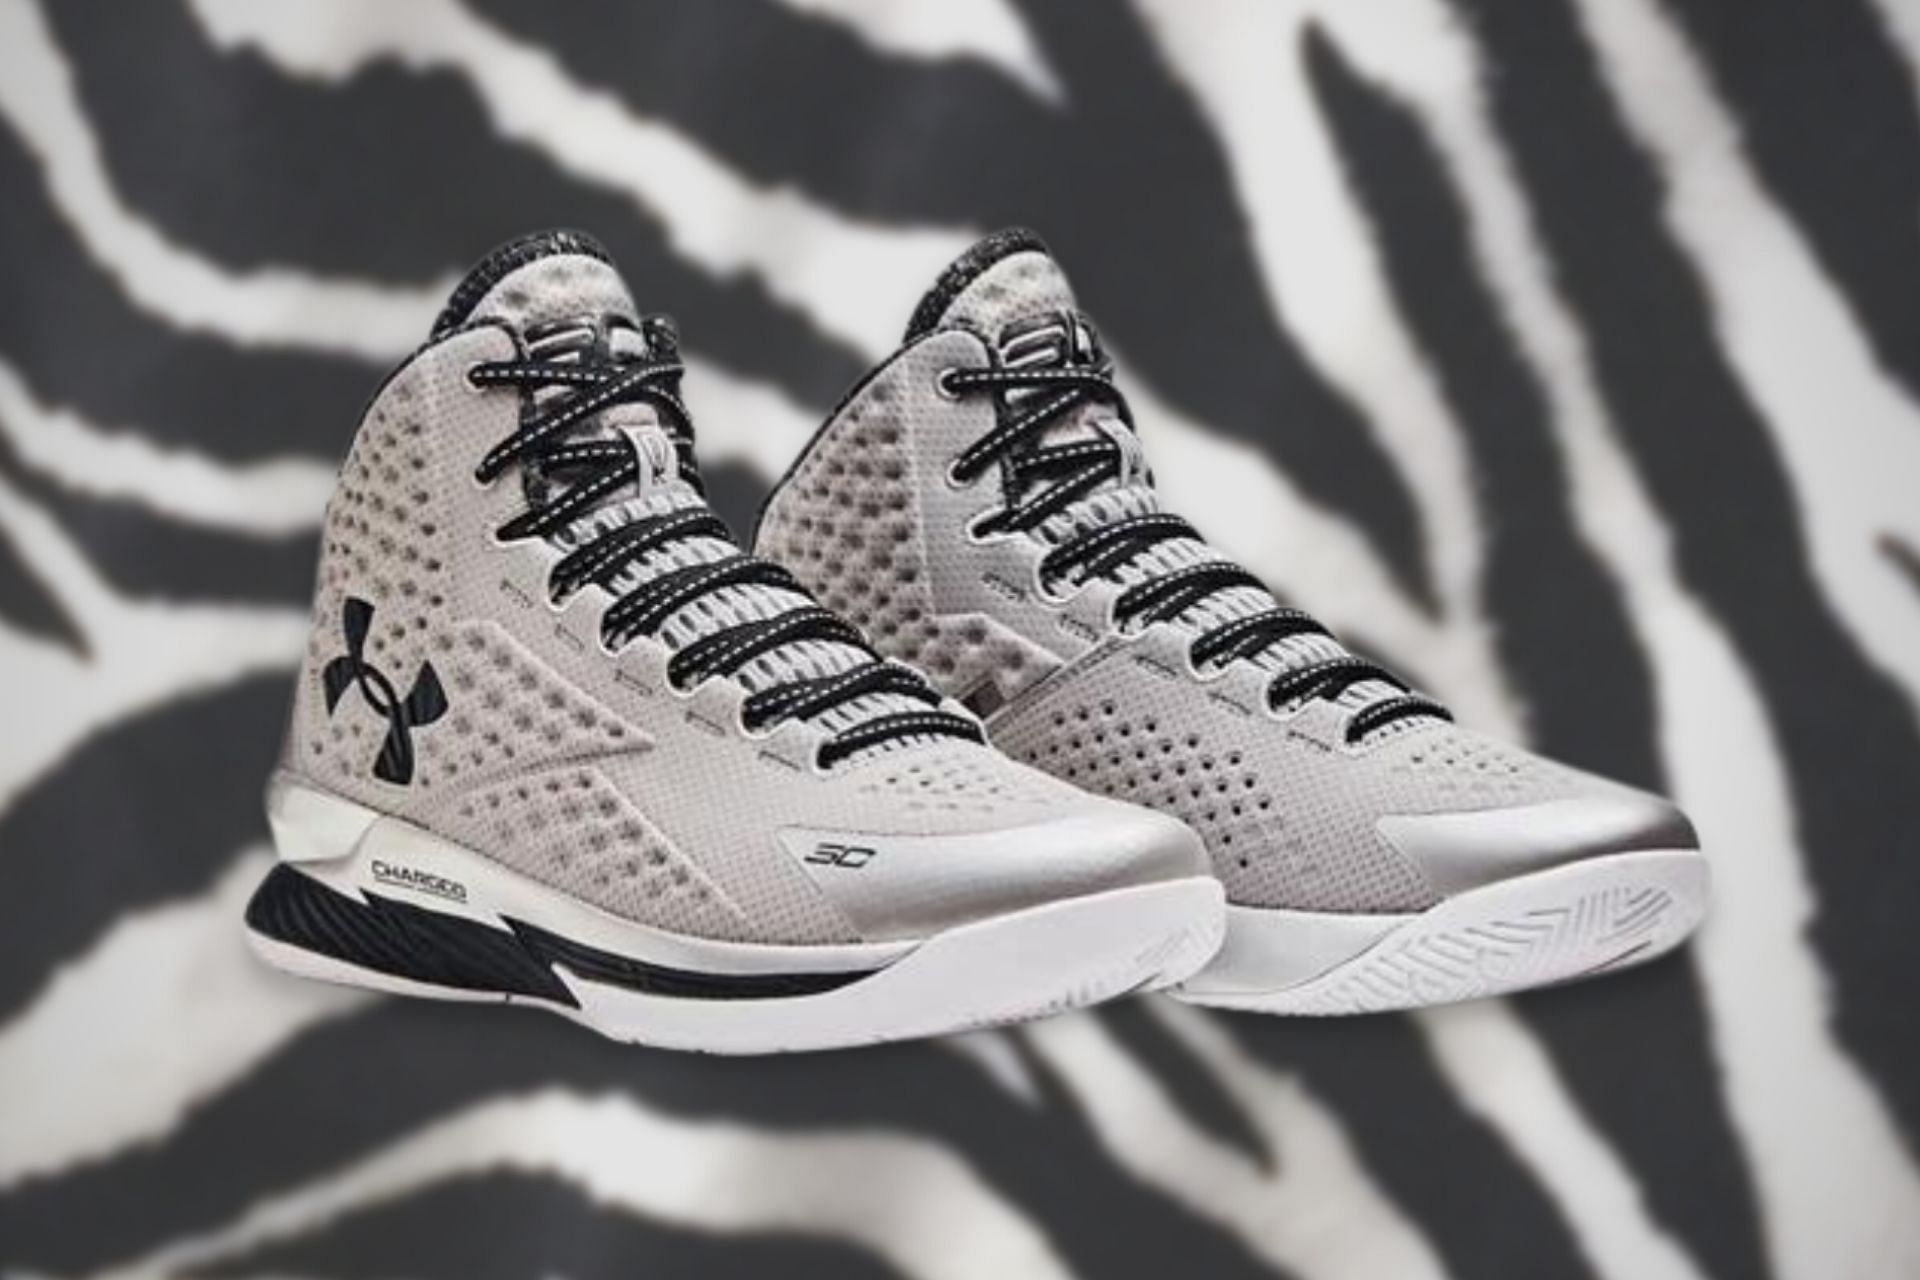 Stephen Curry x Under Armour Curry 1 "Black History Month" sneakers